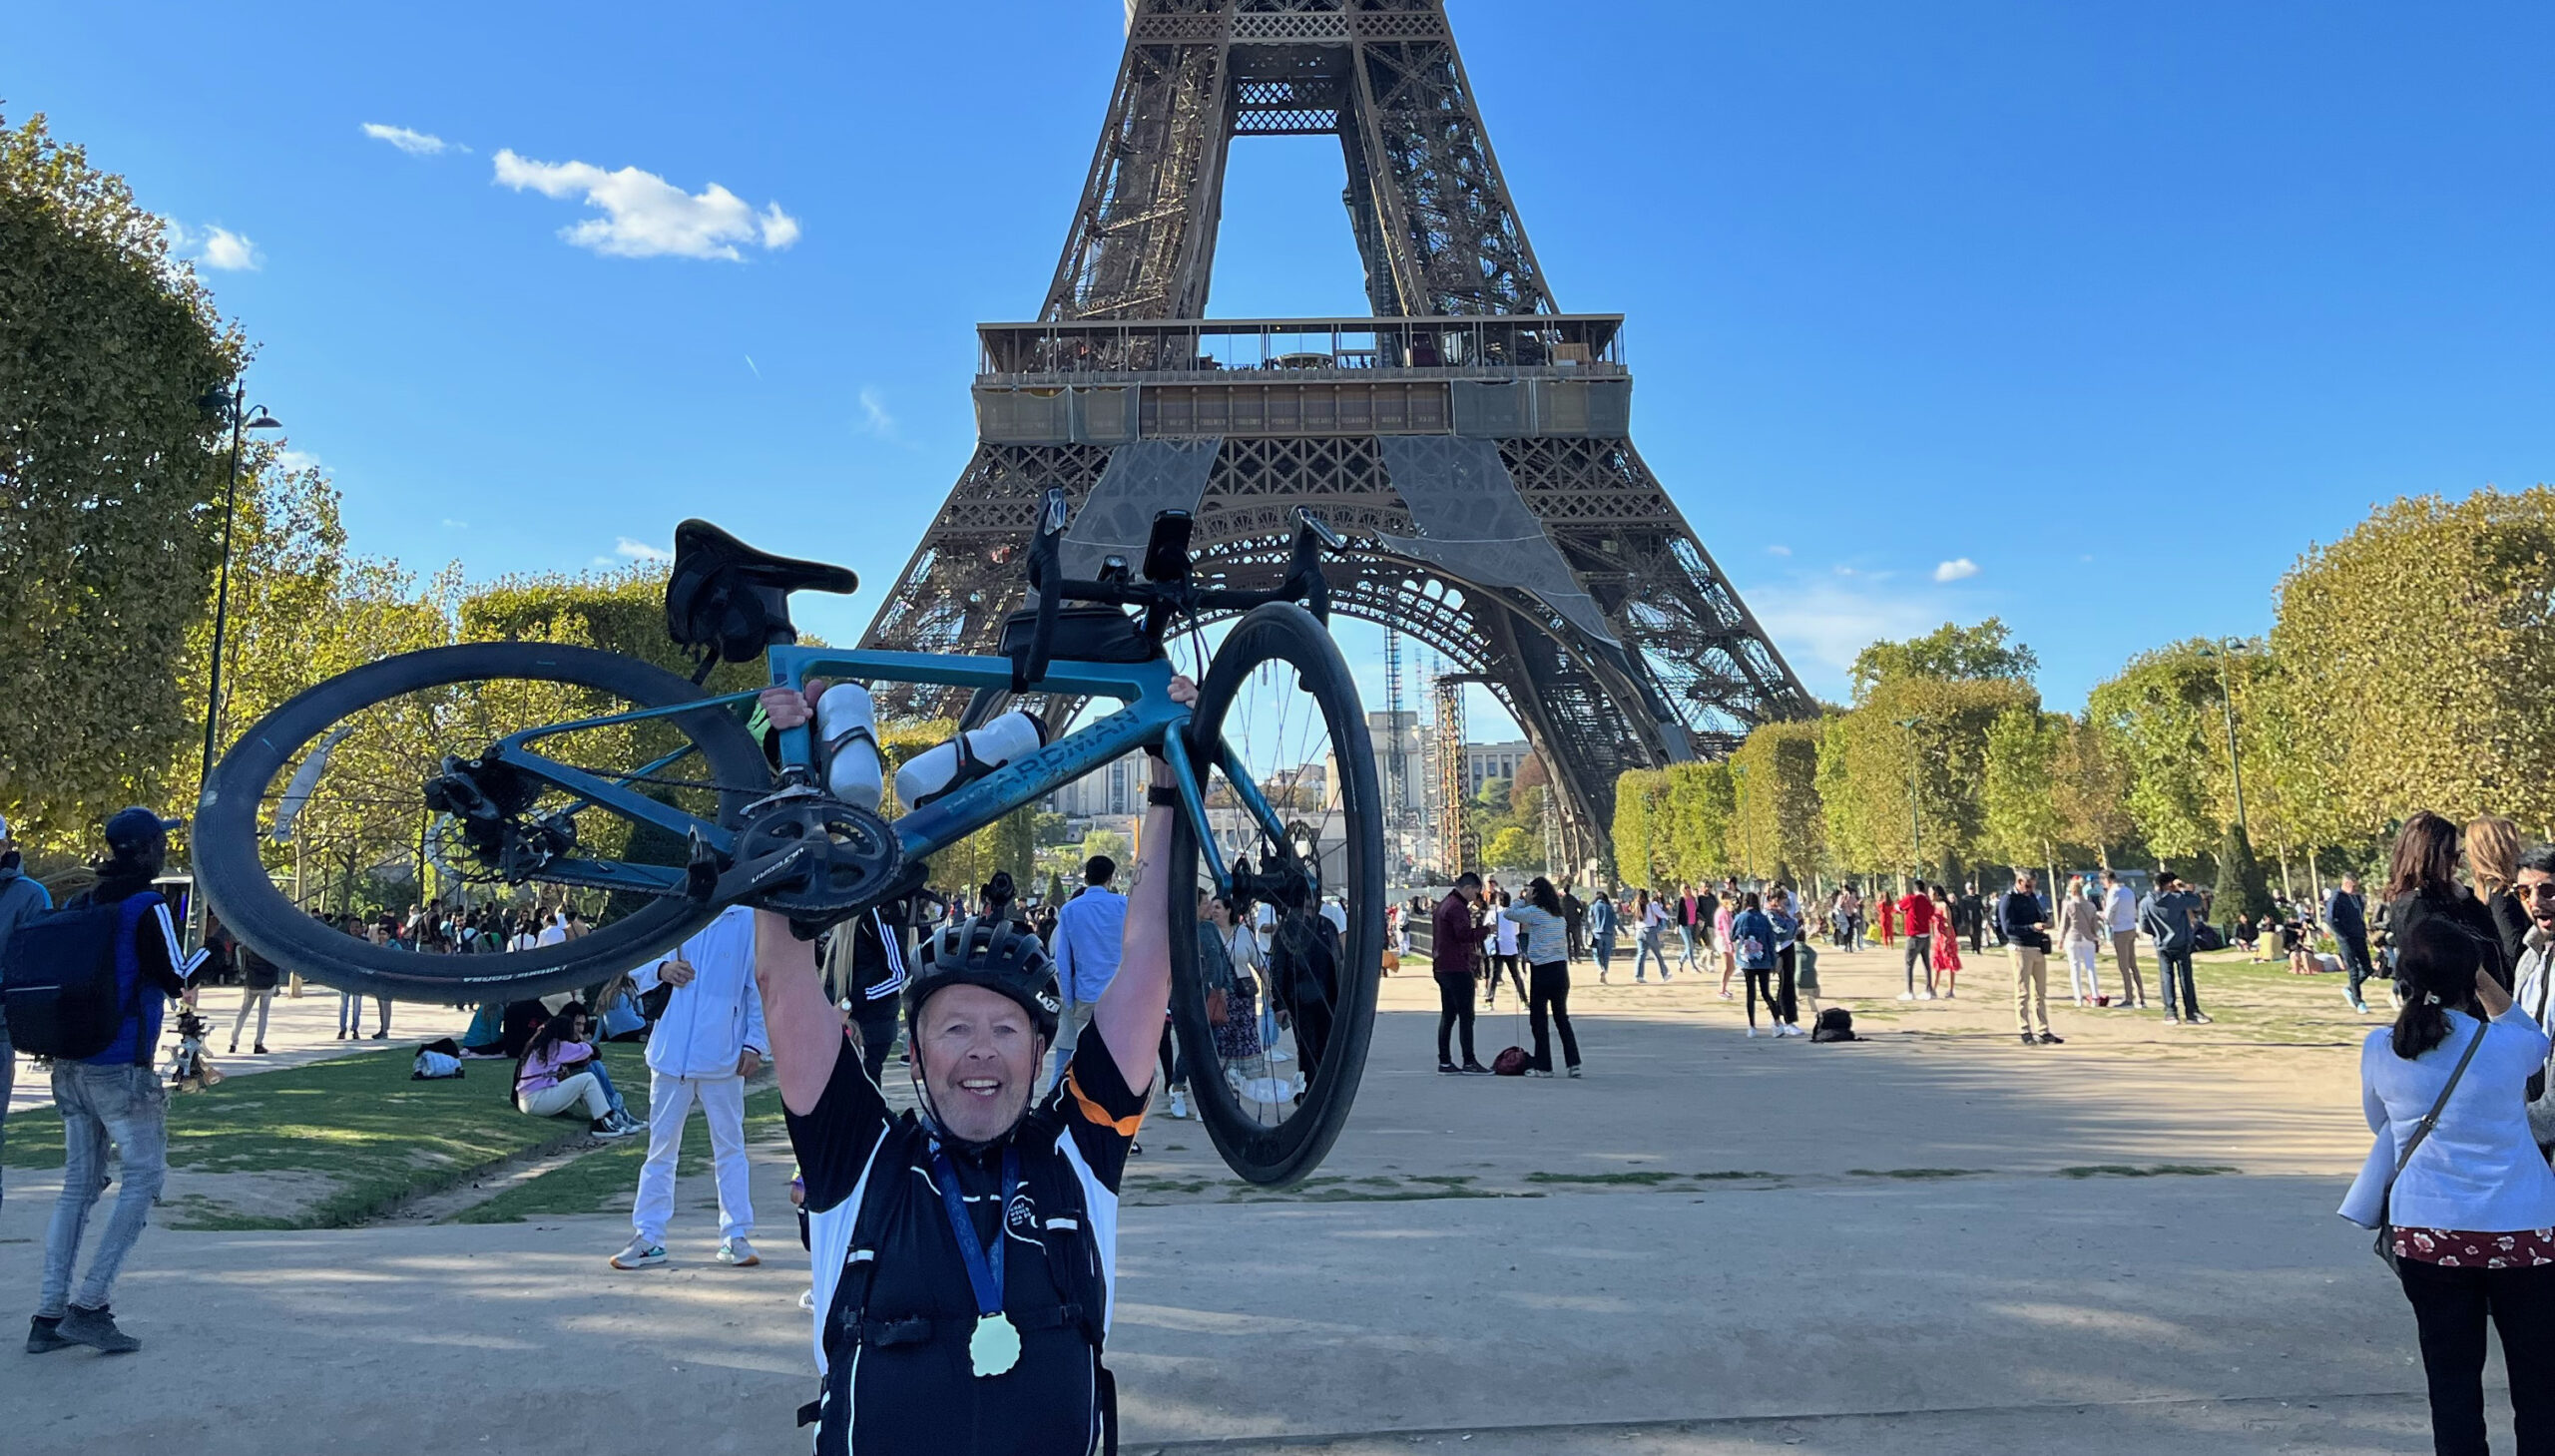 Peter lifting up his bike in celebration in front of the Eiffel tower